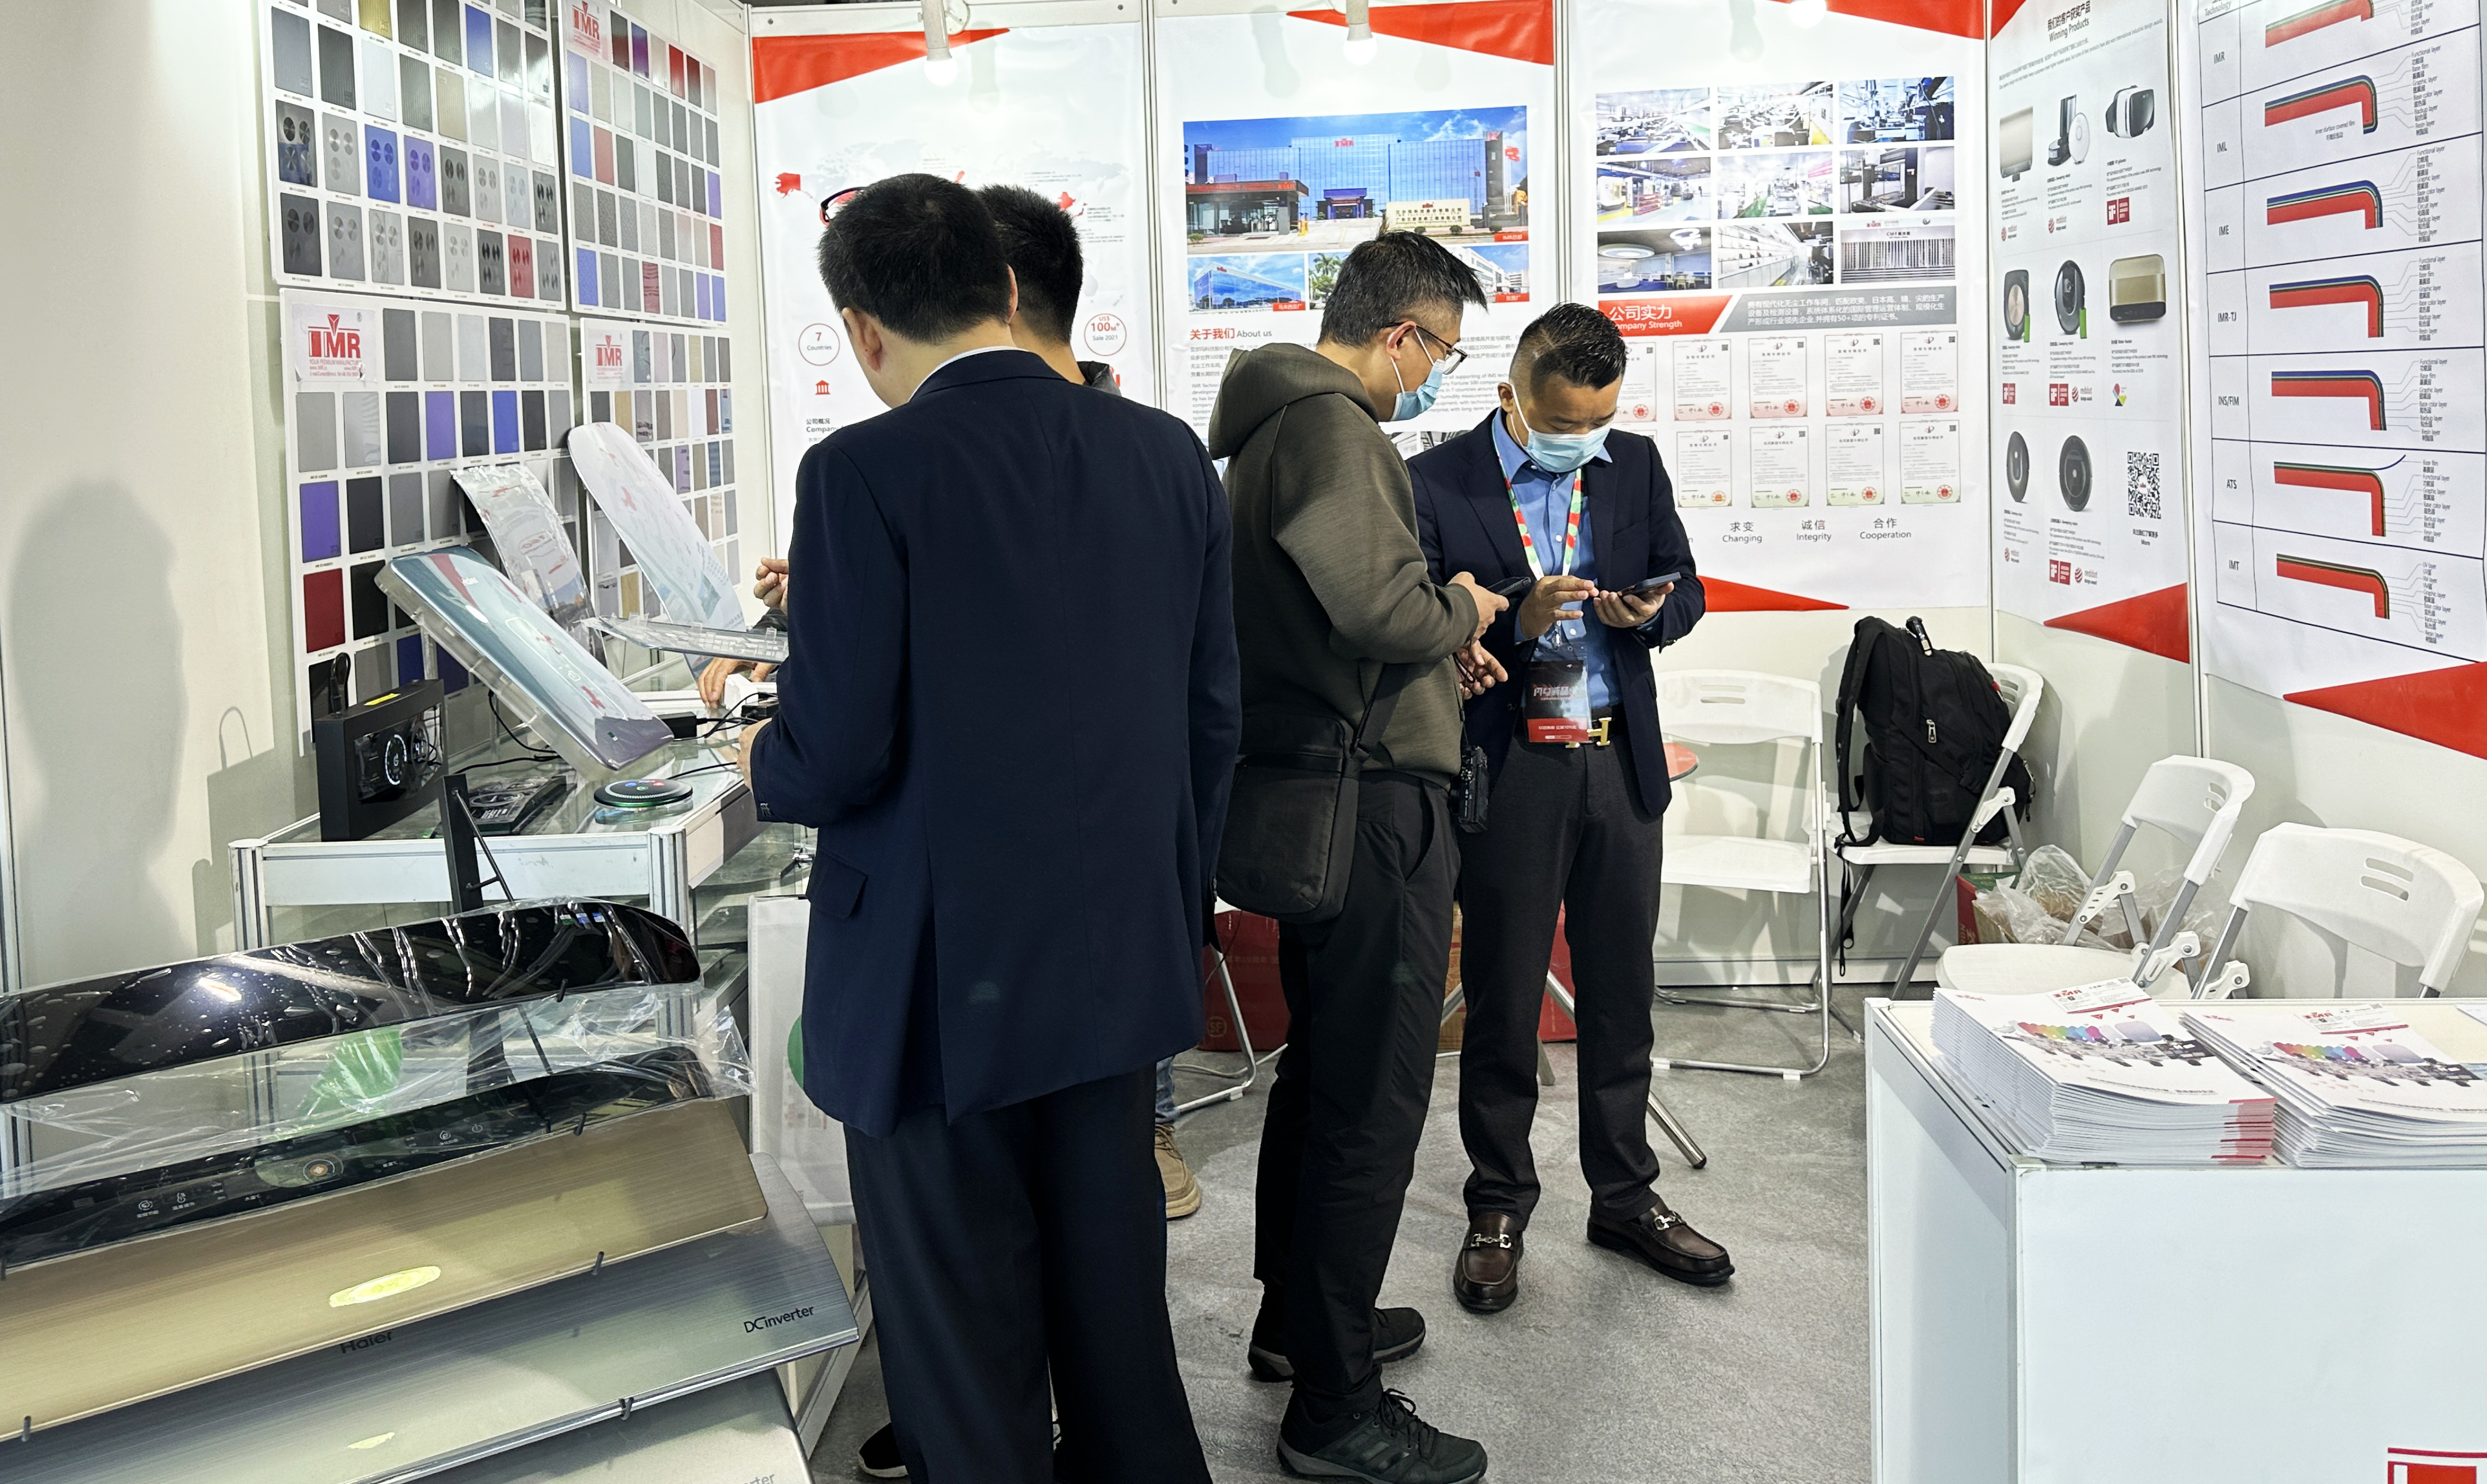 AWE2024 (Appliance&Electronics World Expo) was grandly held at the Shanghai New International Expo Center(图5)